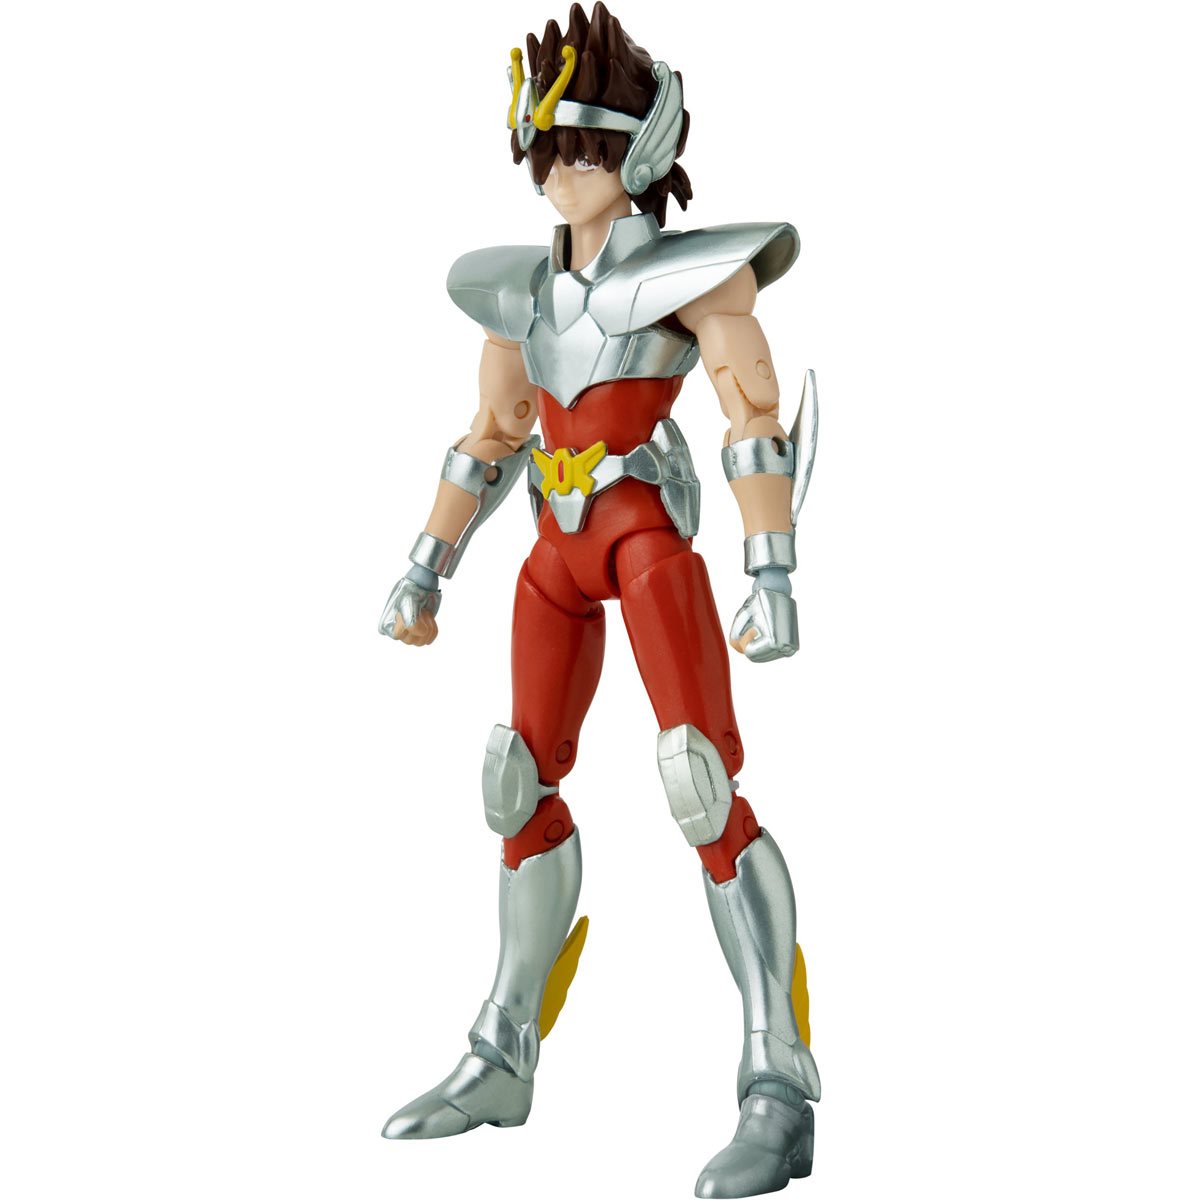 Anime Heroes KNIGHTS OF THE ZODIAC Pegasus Seiya Action Figure Toy NEW 2020 